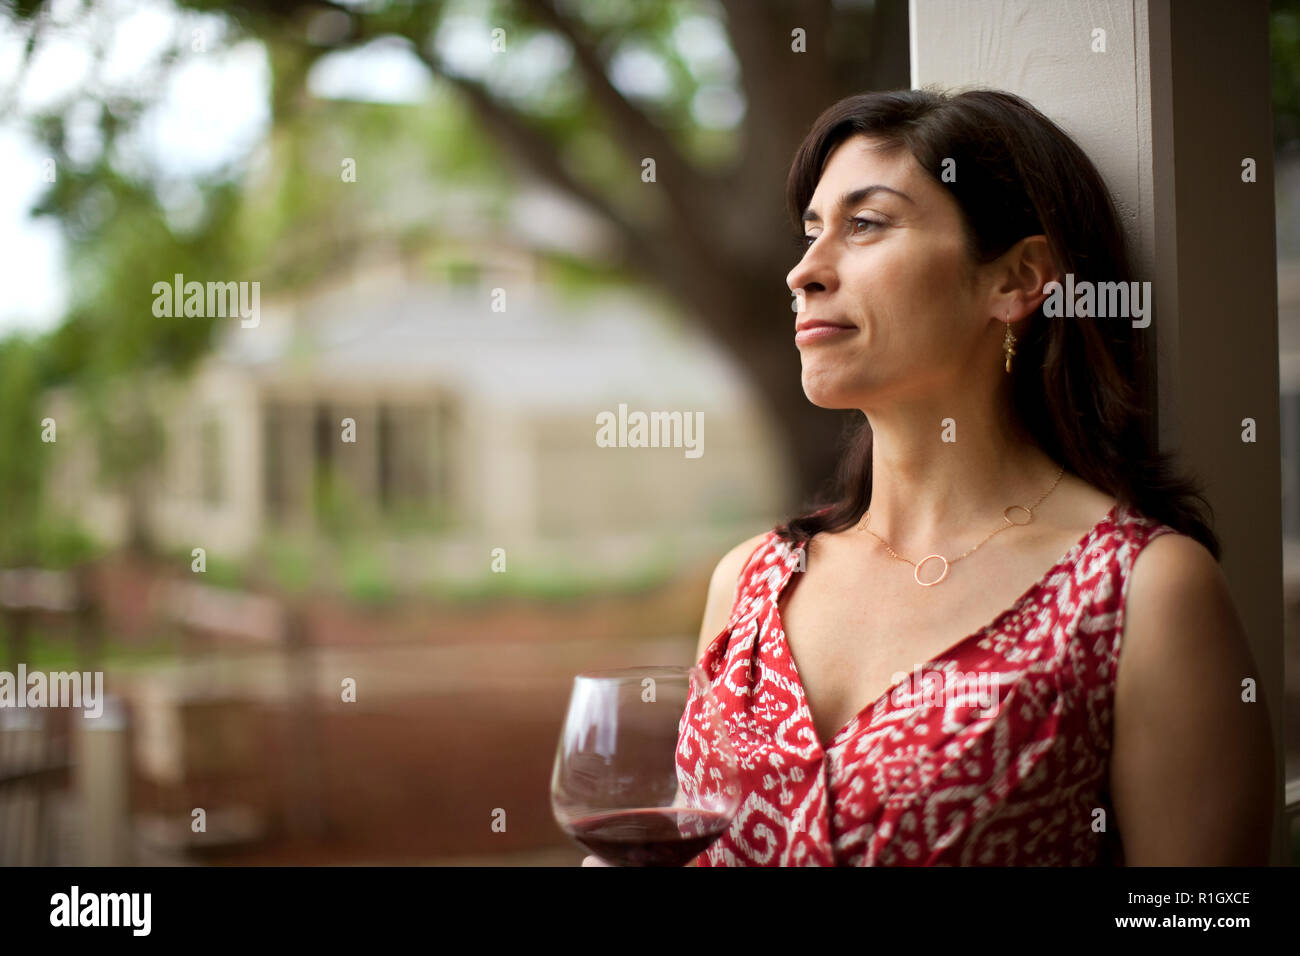 Contented middle-aged woman smiles peacefully as she relaxes with a glass of red wine and looks at the view from her back doorstep. Stock Photo